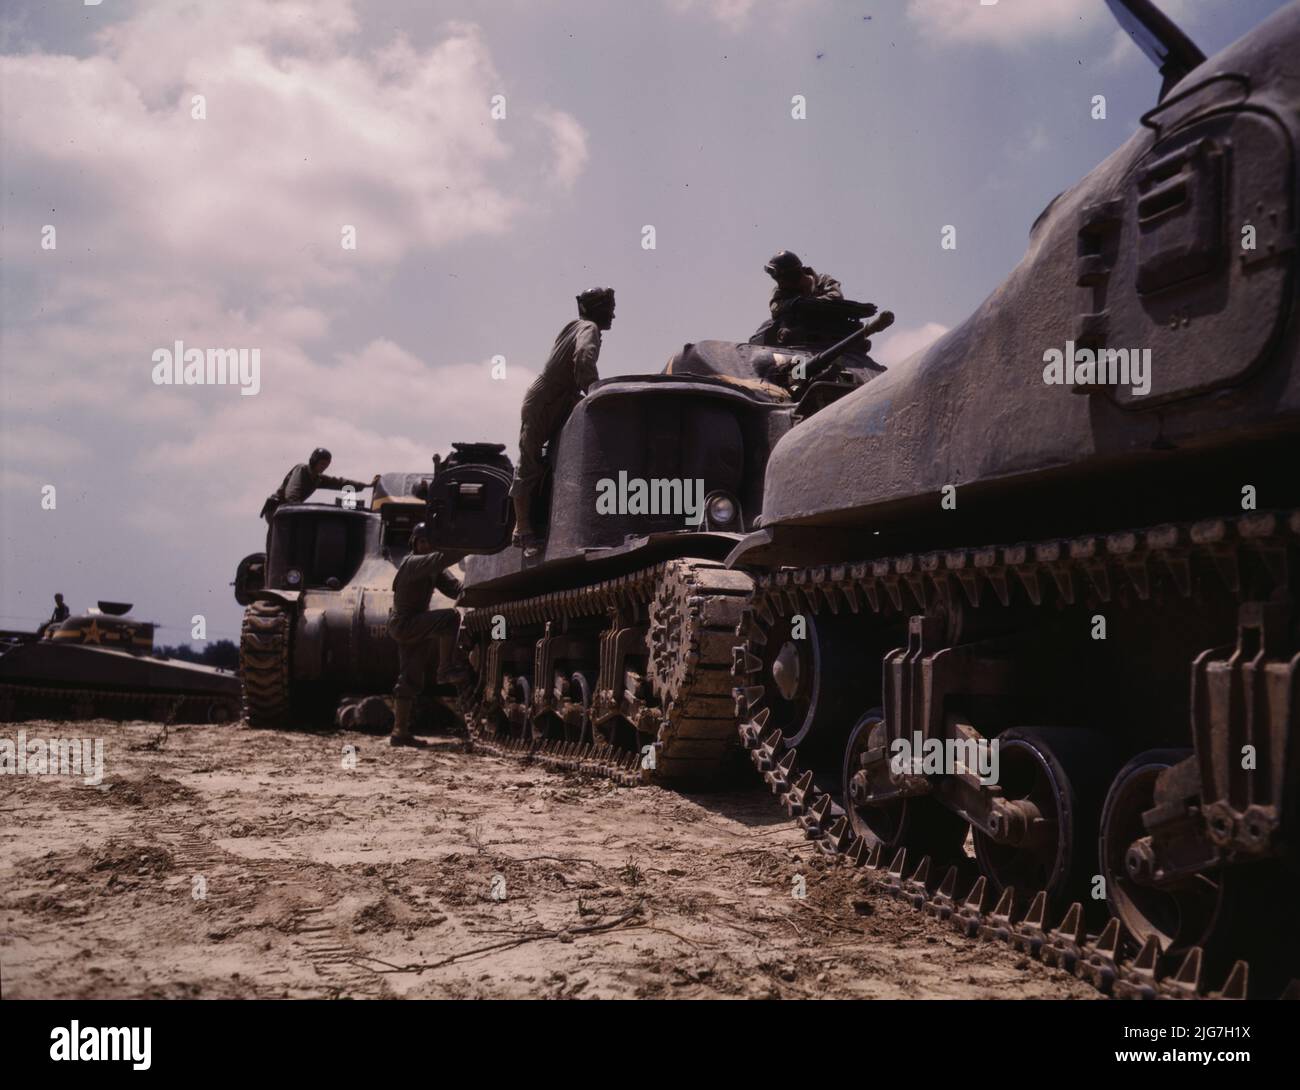 M-3 and M4 tank company at bivouac, Ft. Knox, Ky. Stock Photo